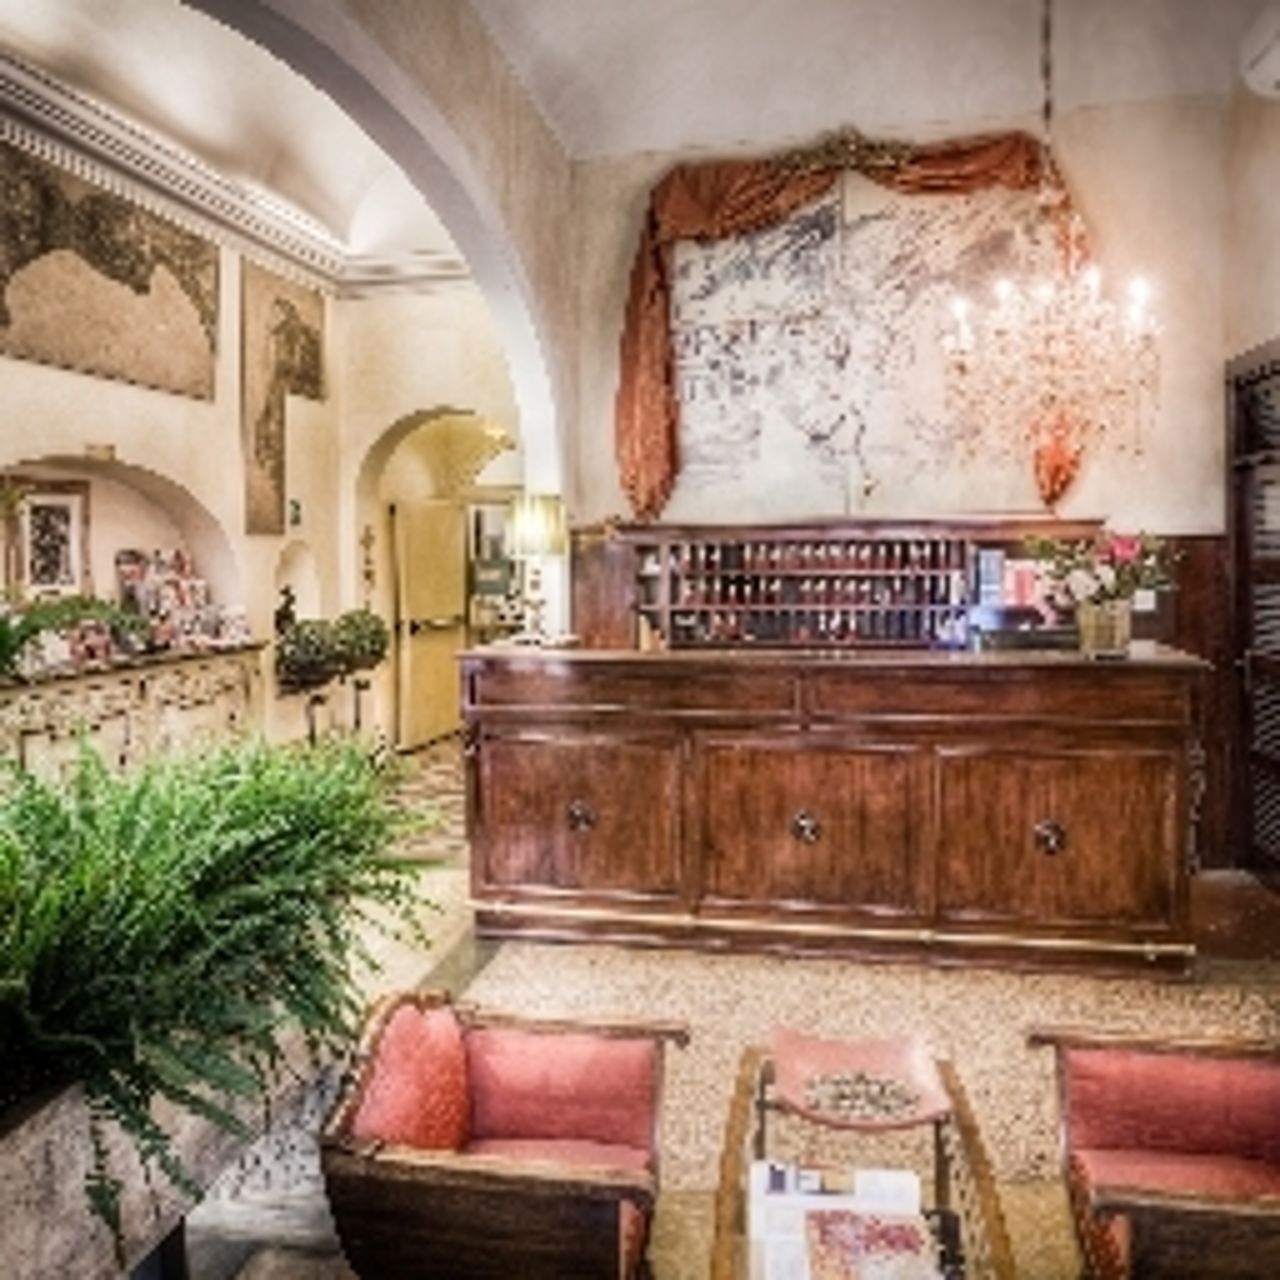 Hotel Palazzo dal Borgo - Florence - Great prices at HOTEL INFO